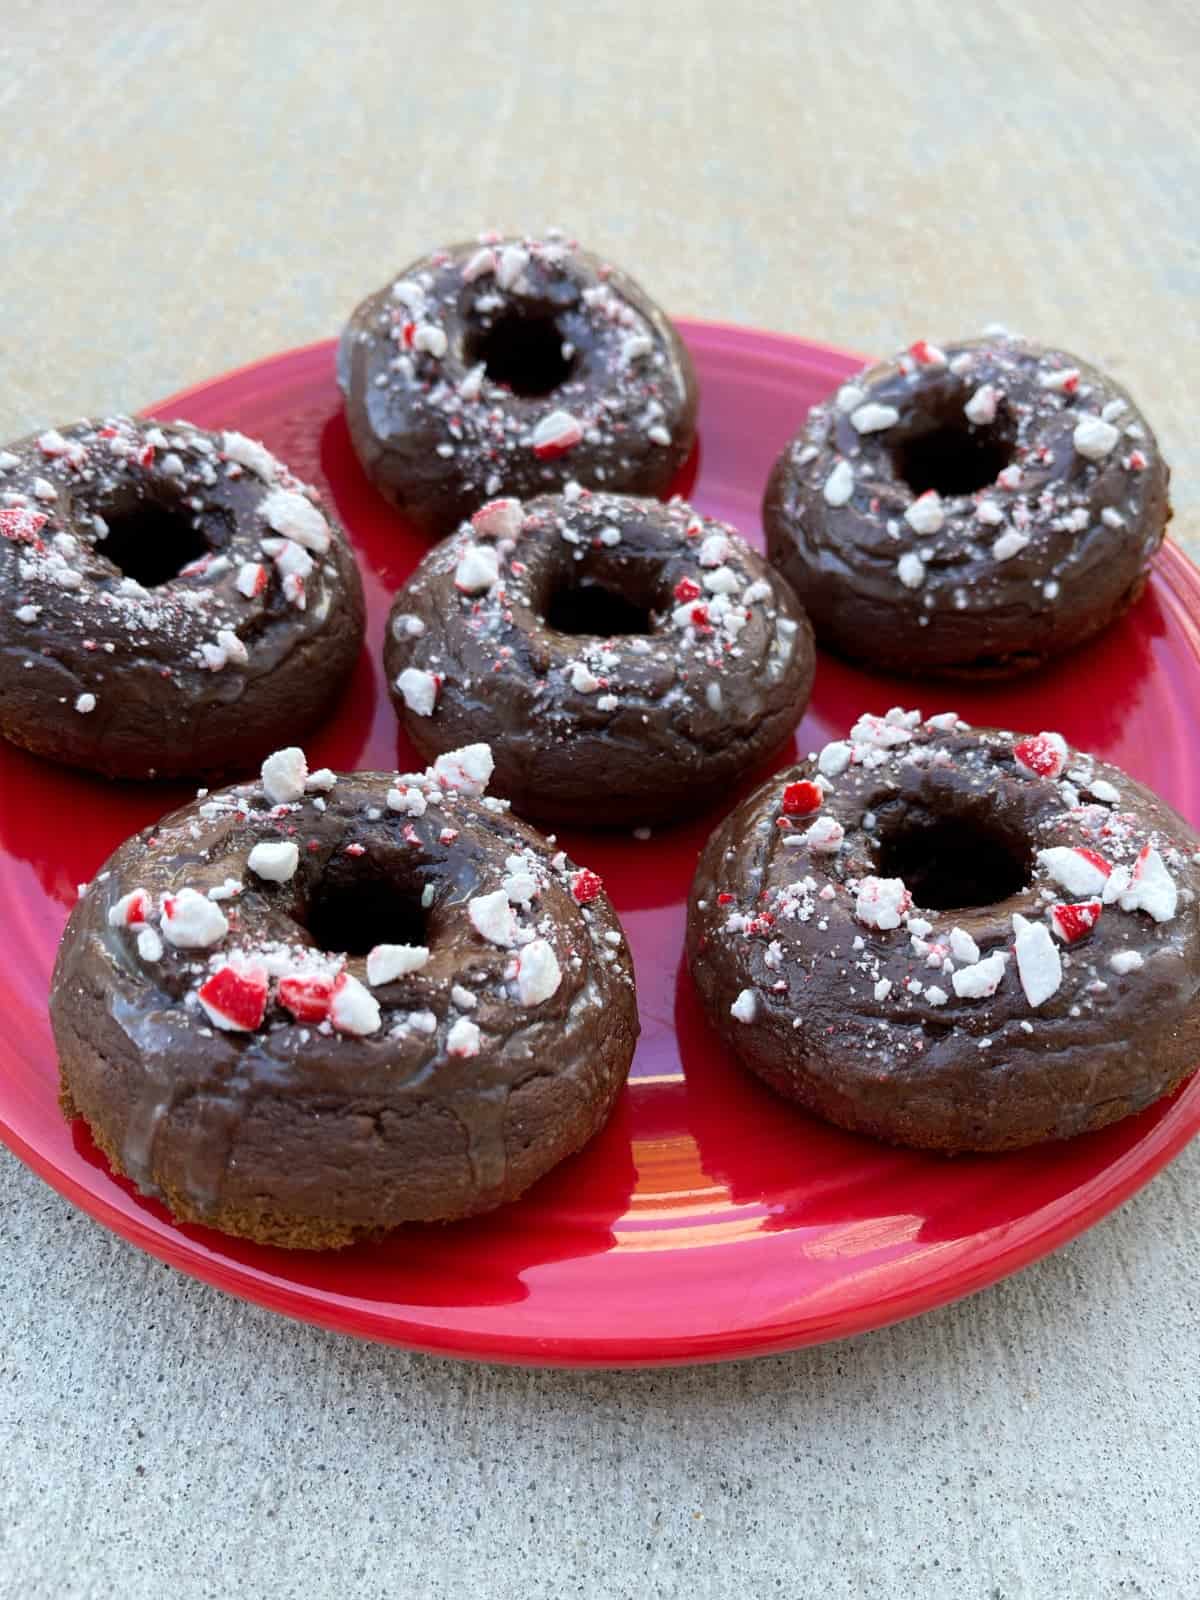 Mint chocolate glazed donuts topped with crushed candy canes on red plate.